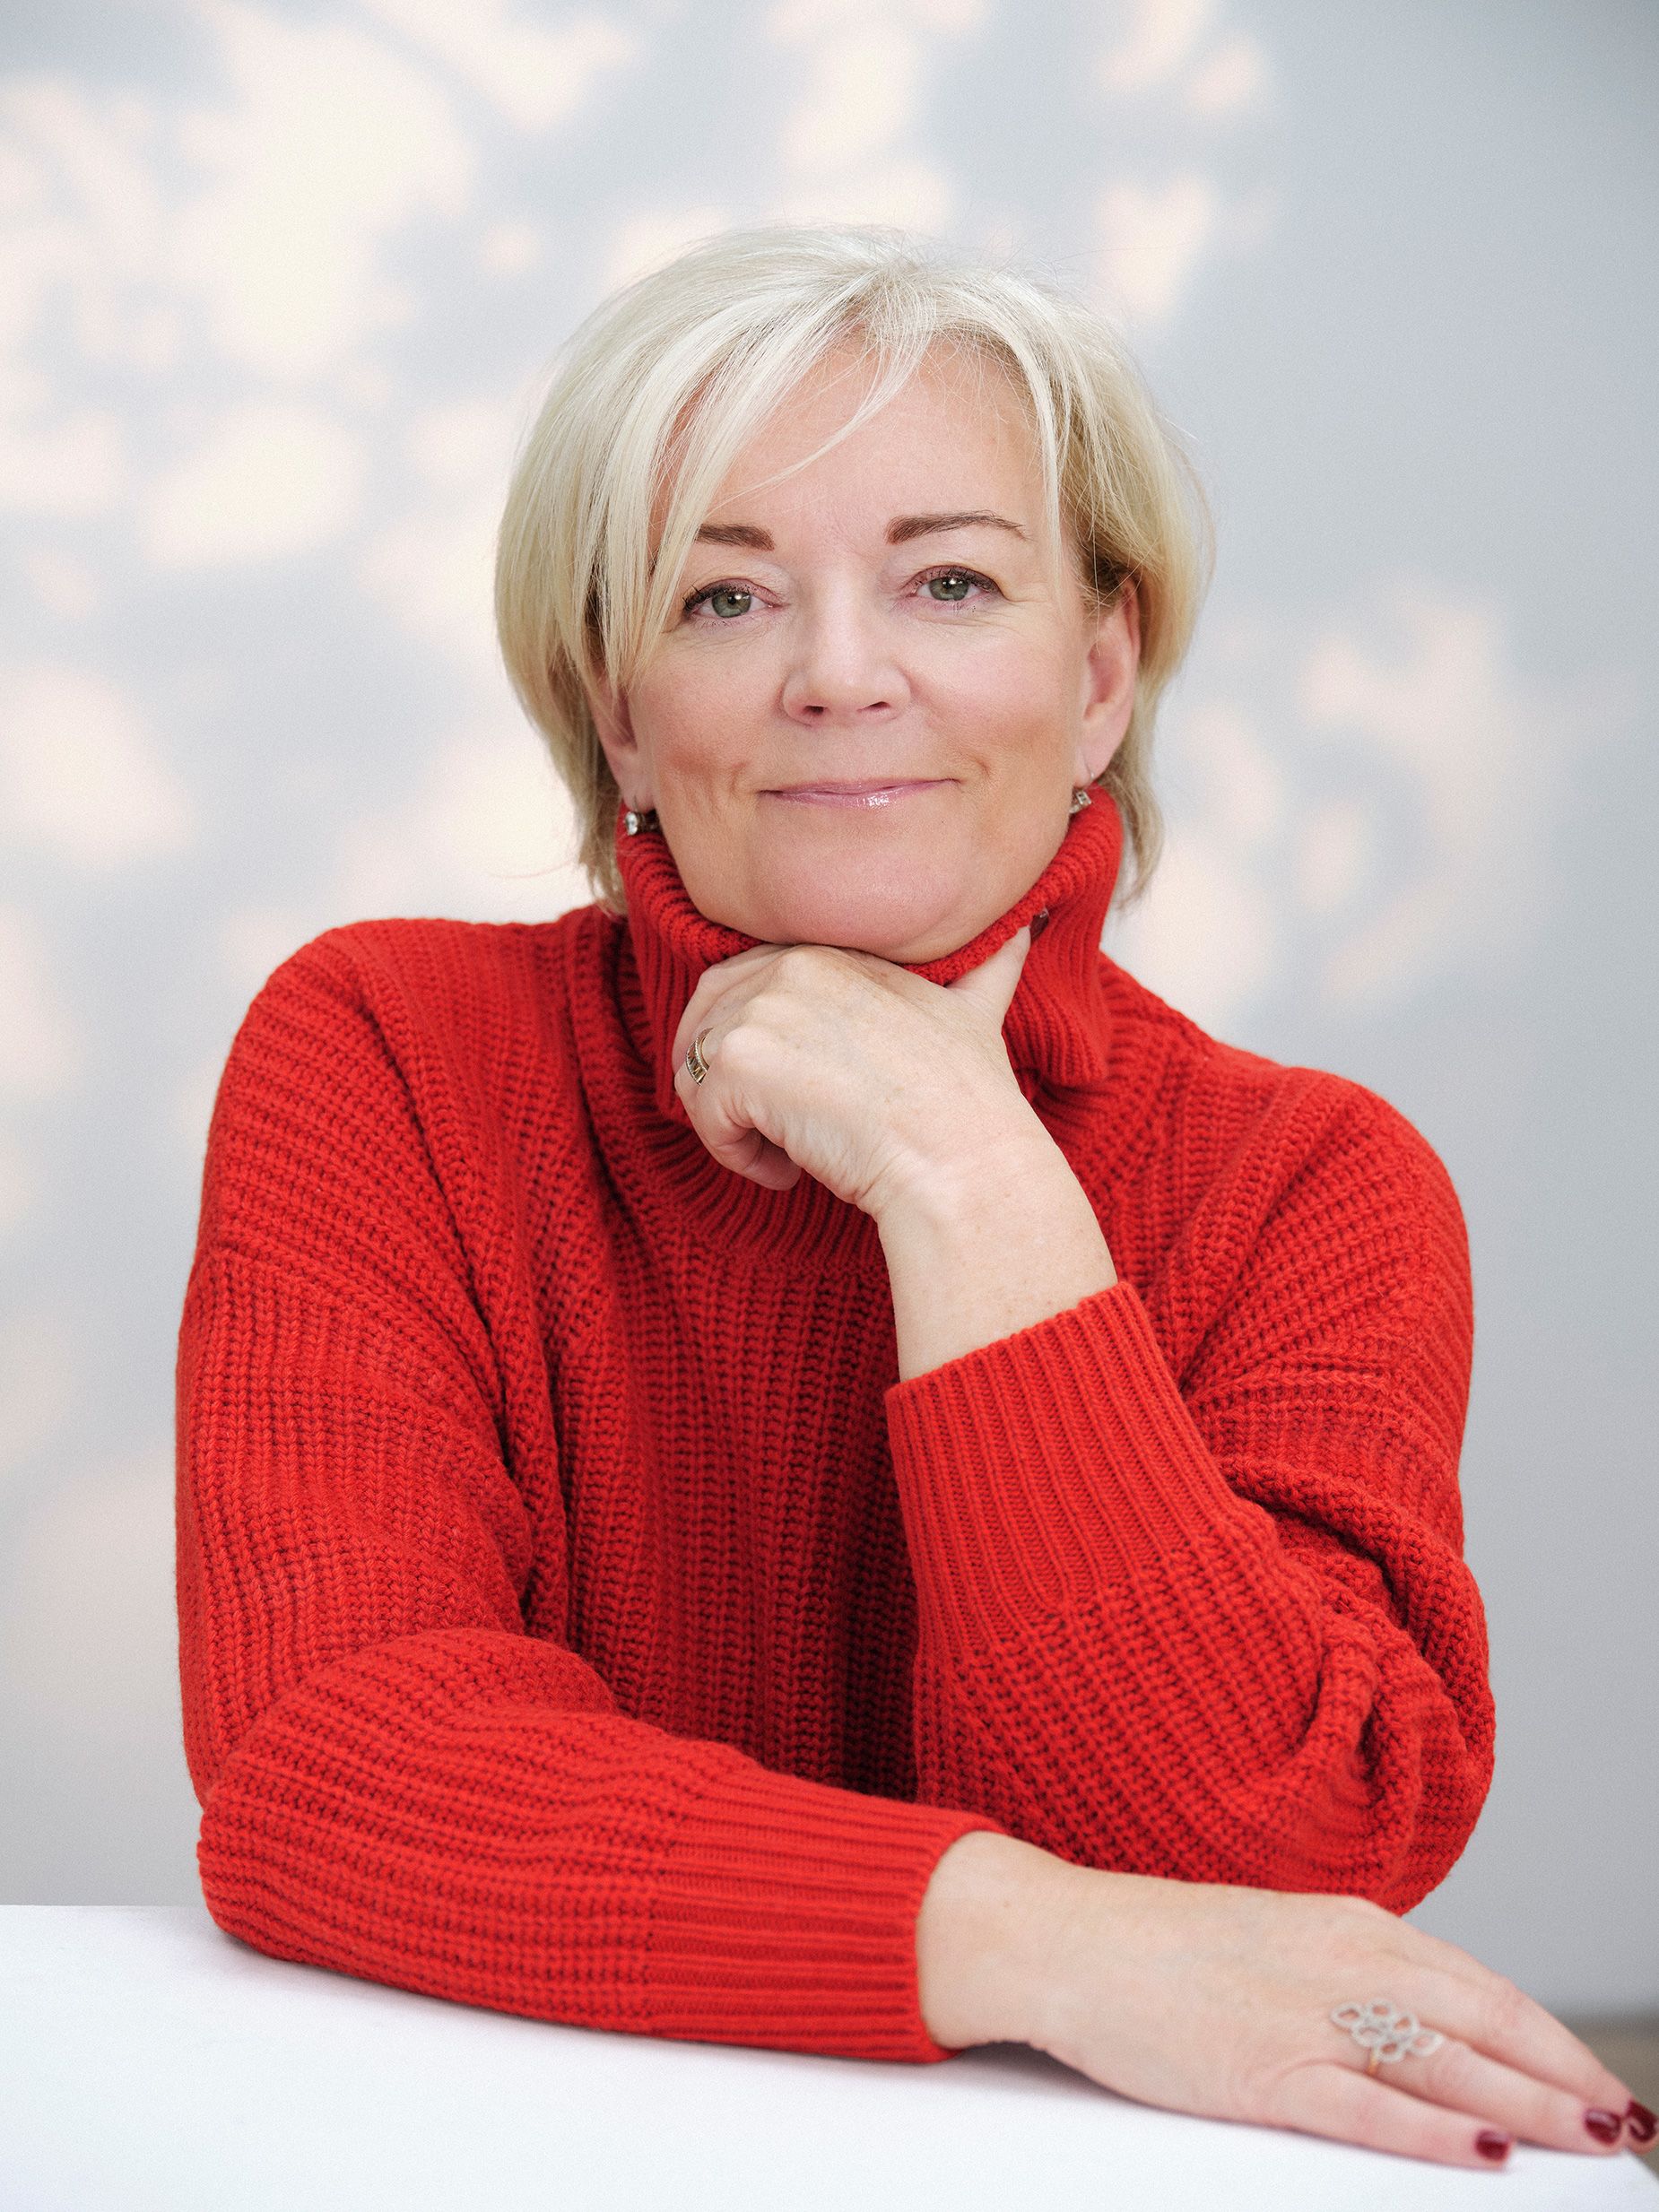 Perfumer Jo Malone uses fragrance as a way of capturing her favorite memories of the seasons.